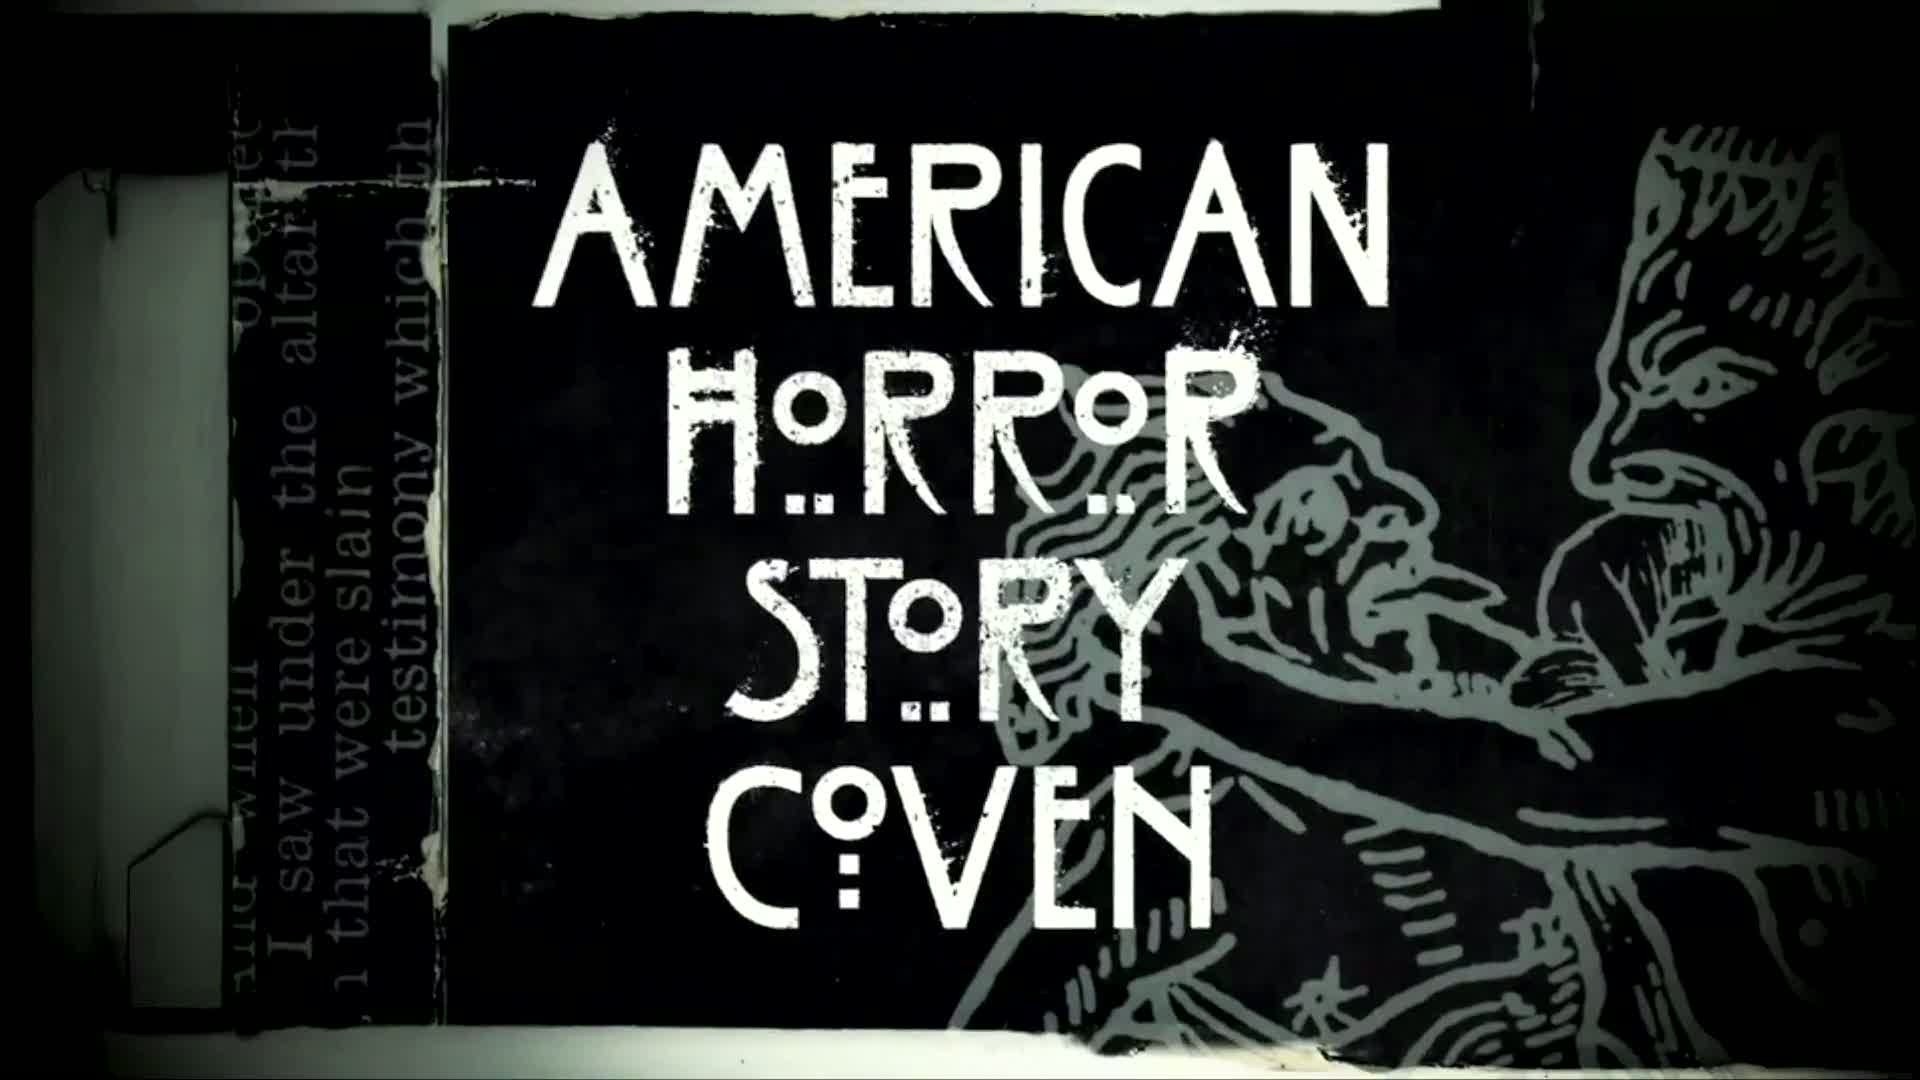 1920x1080  AMERICAN HORROR STORY COVERS & WALLPAPERS | AMERICAN HORROR STORY  .